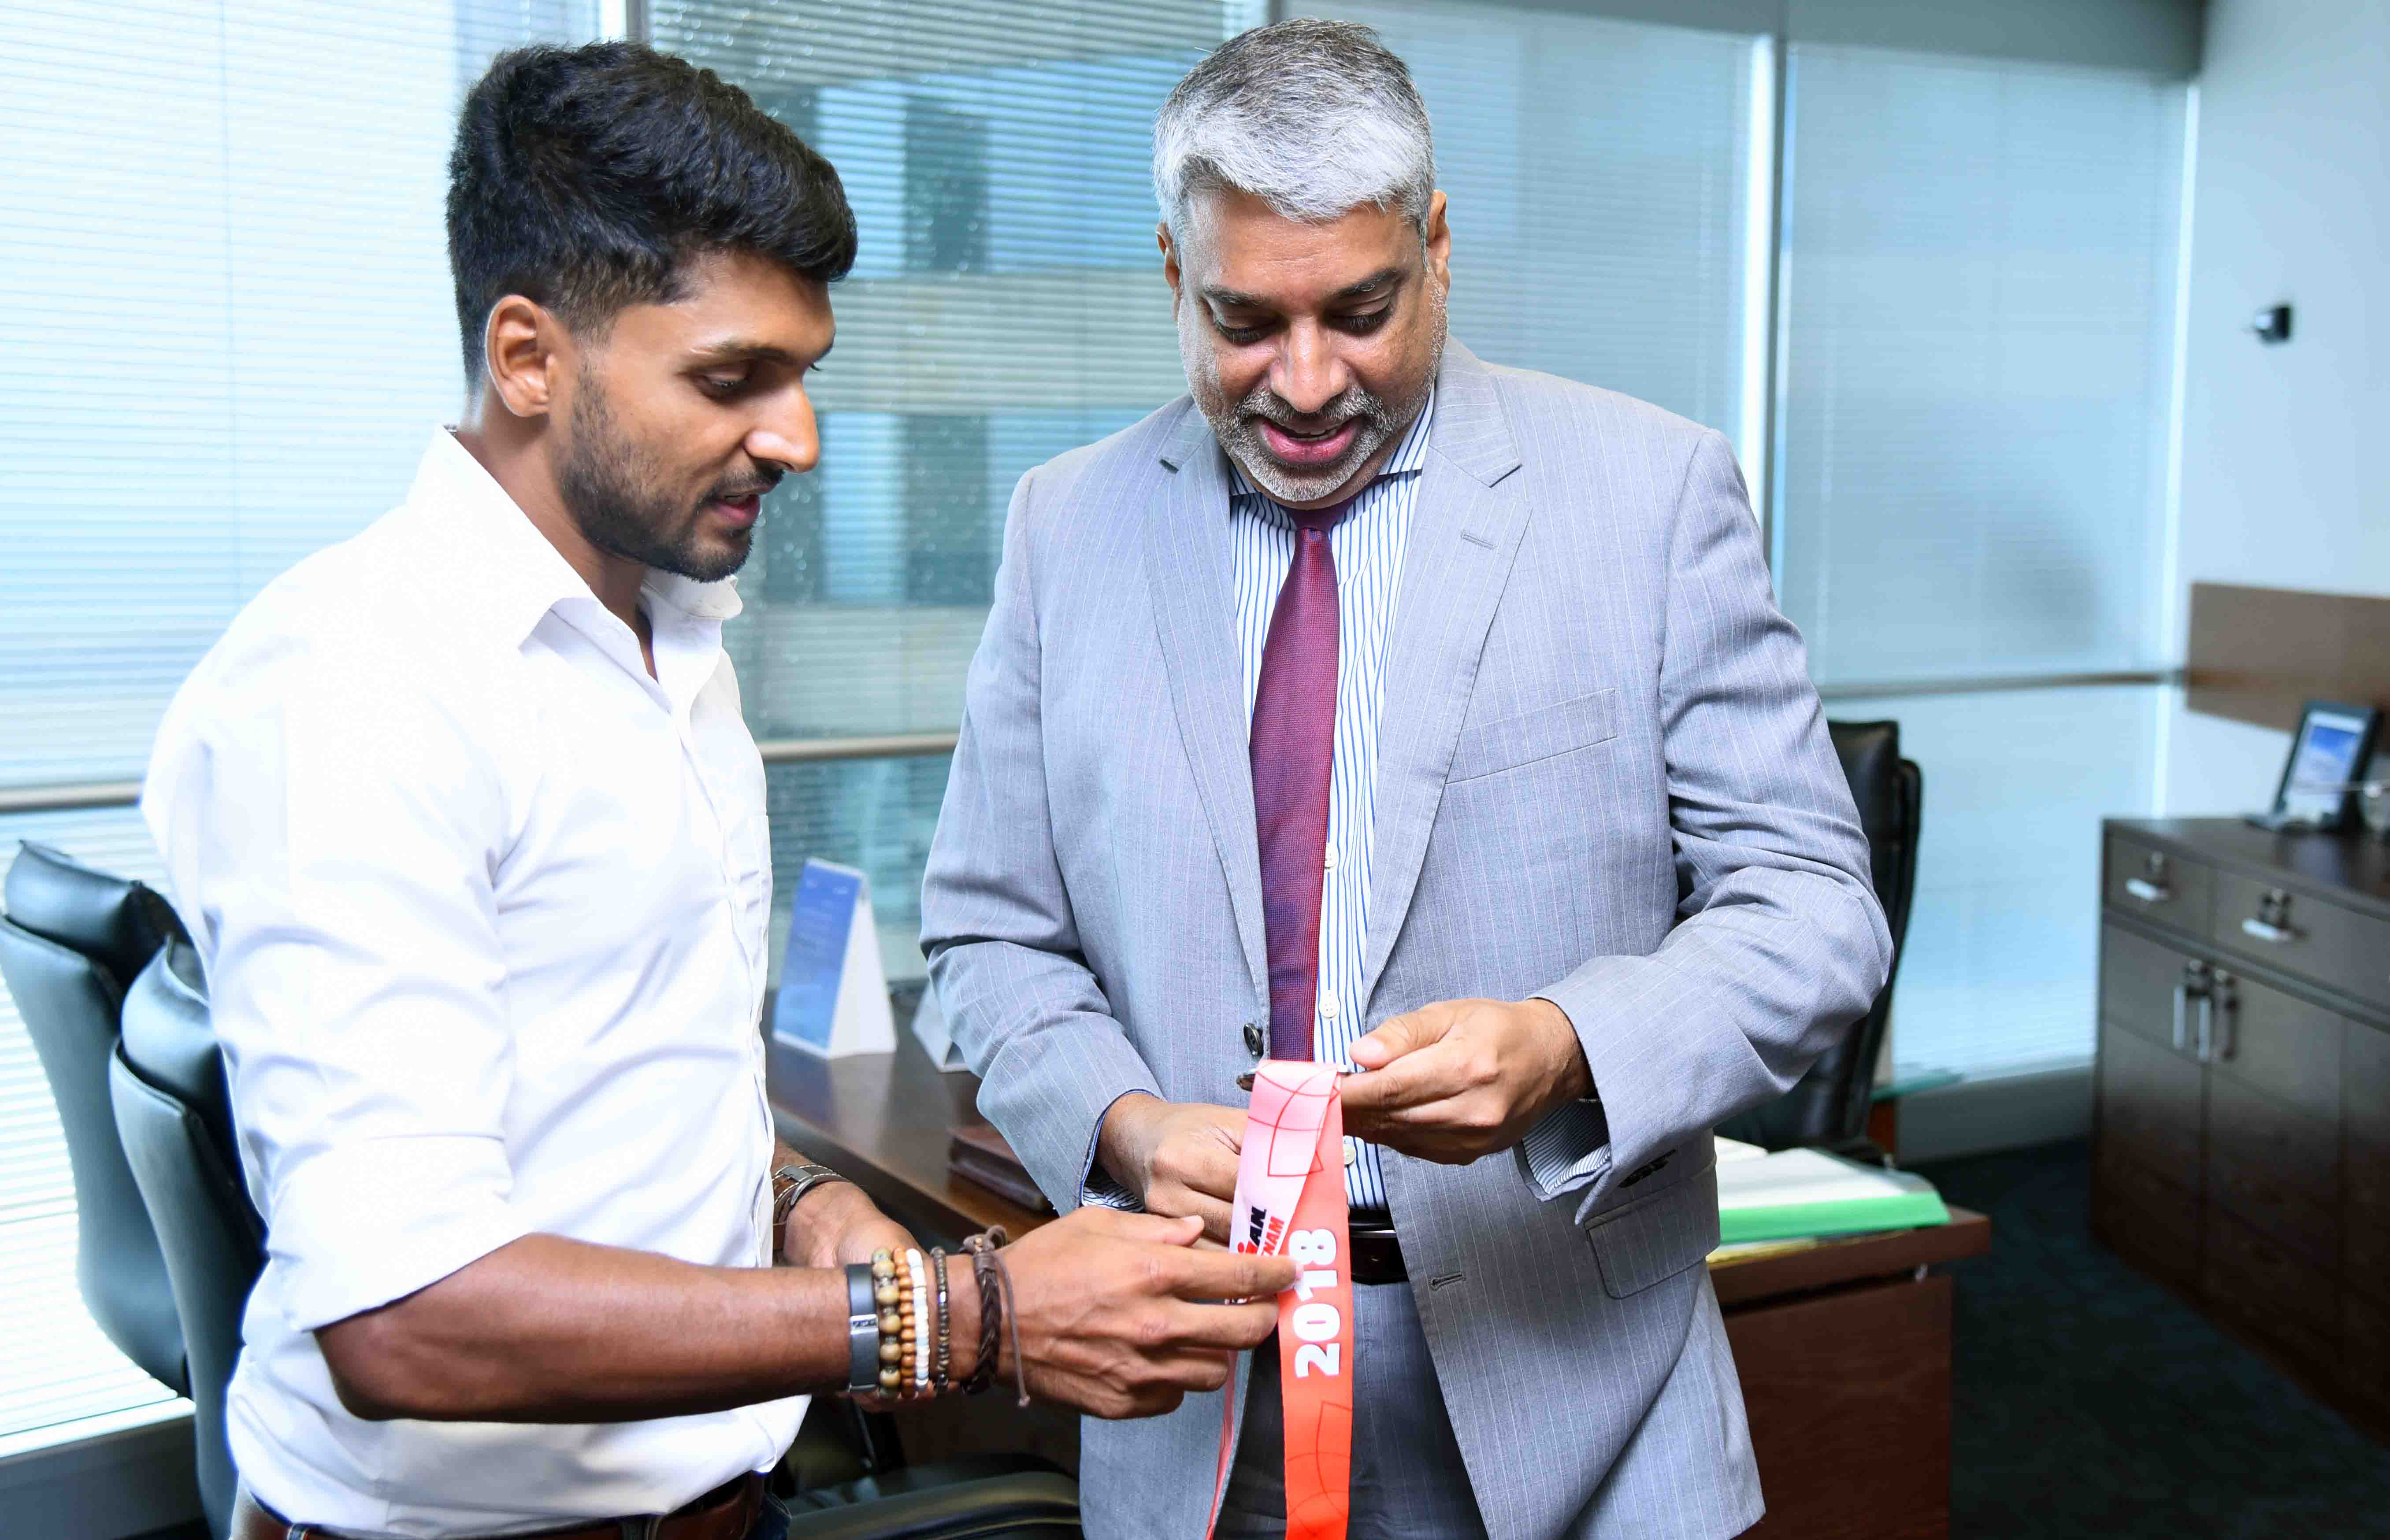 Mithun presenting winning medals to CEO Capt. Suren Ratwatte at his office